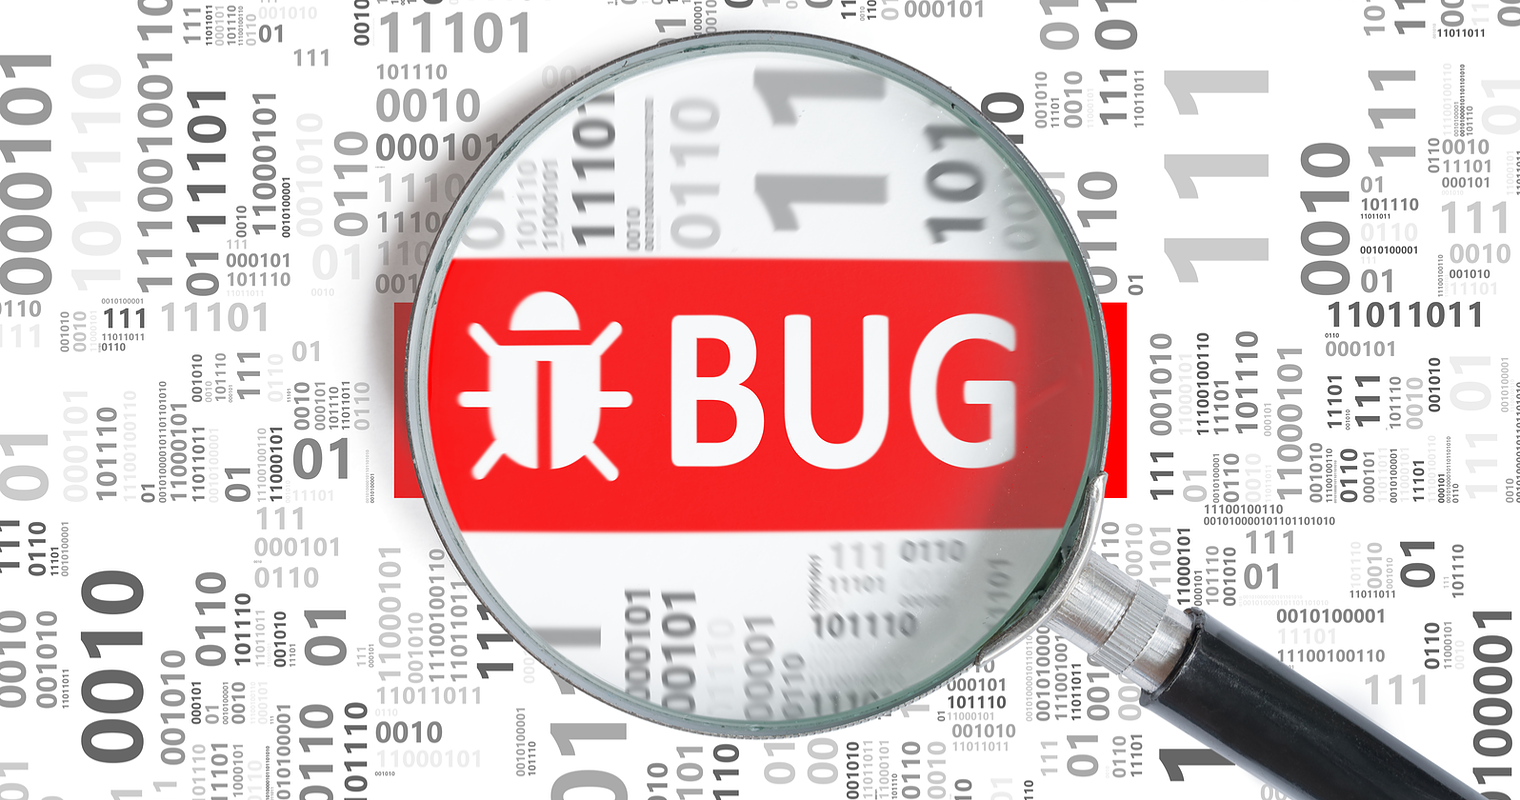 Google’s New Website Analysis Tool, Web.dev, Has Several Reported Bugs